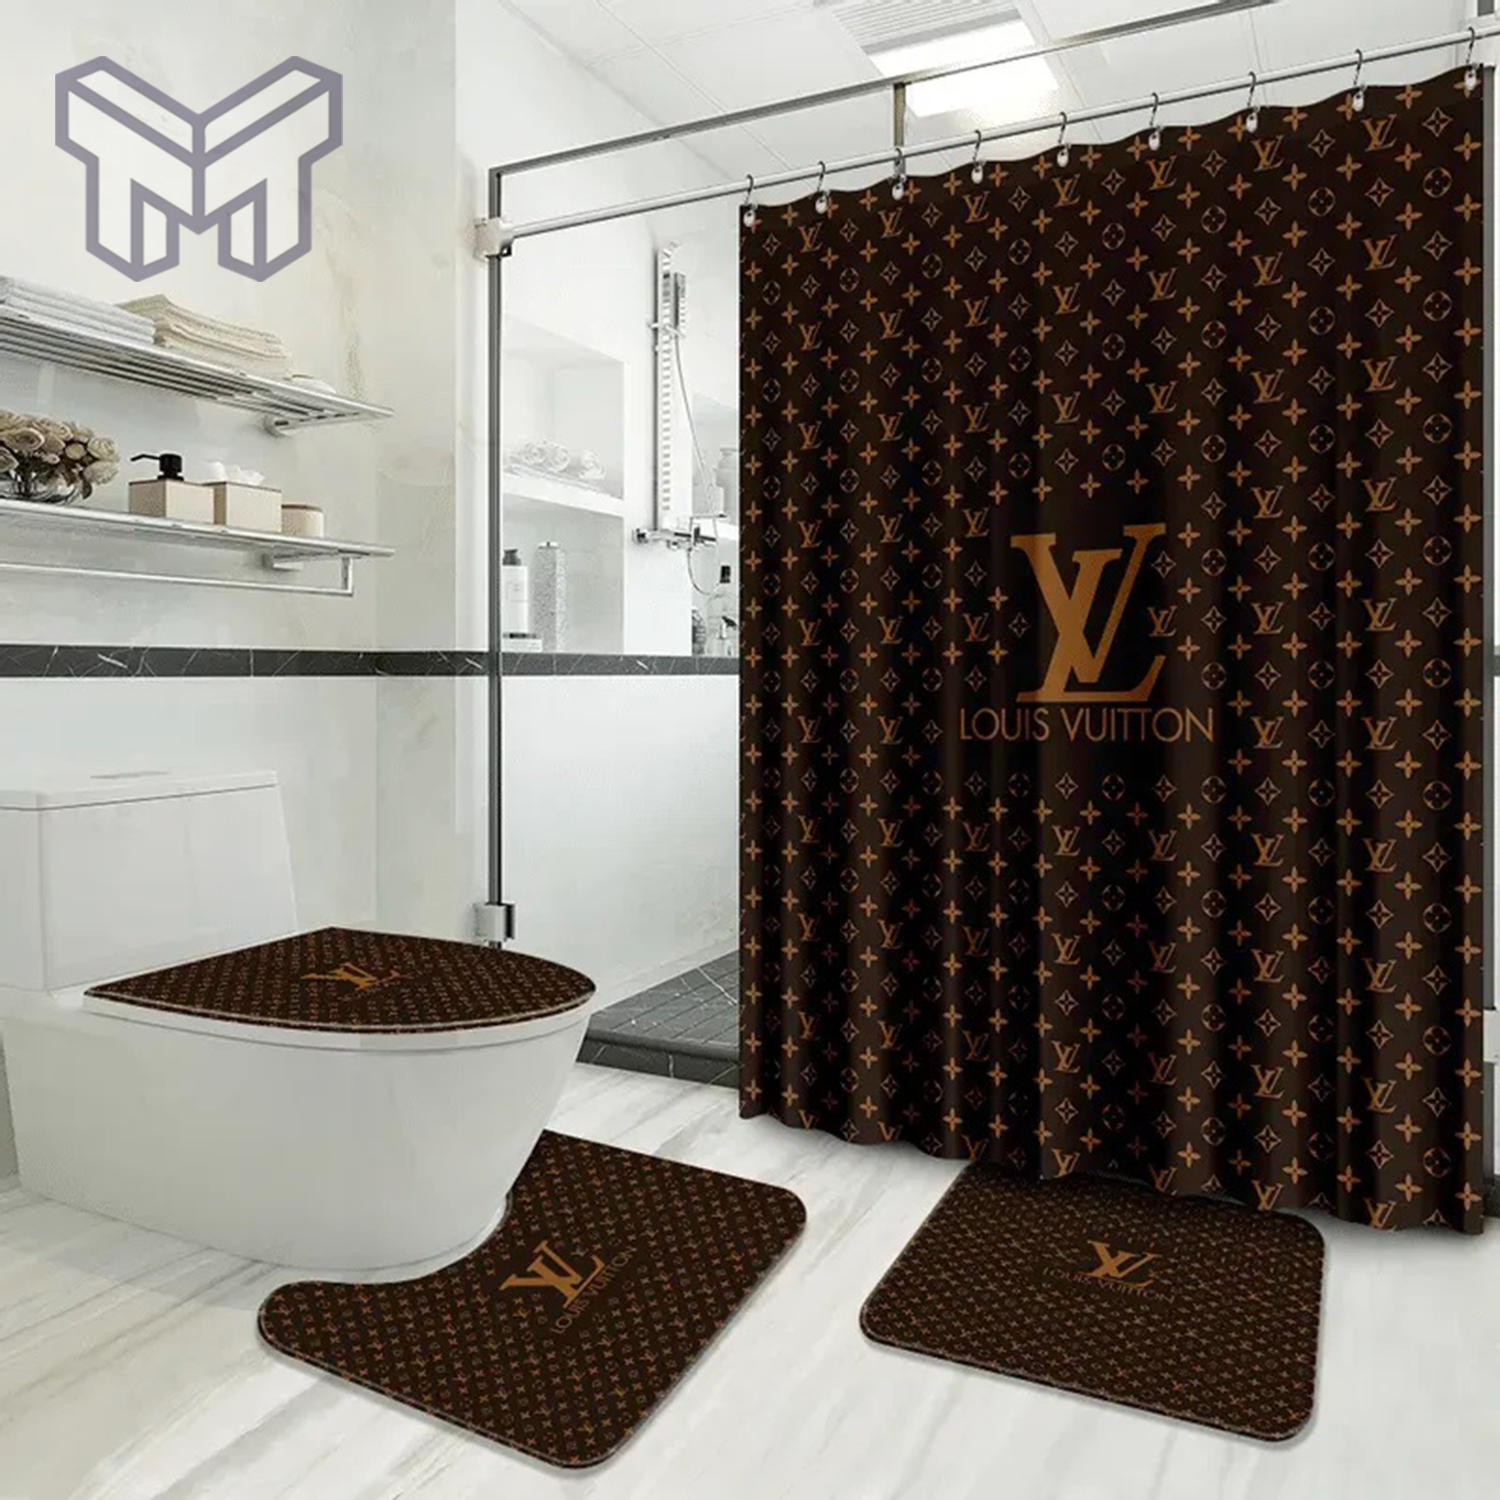 Louis Vuitton Fashion Logo Limited Luxury Brand Bathroom Set Home Decor 48 Shower  Curtain And Rug Toilet Seat Lid Covers Bathroom Set - Muranotex Store